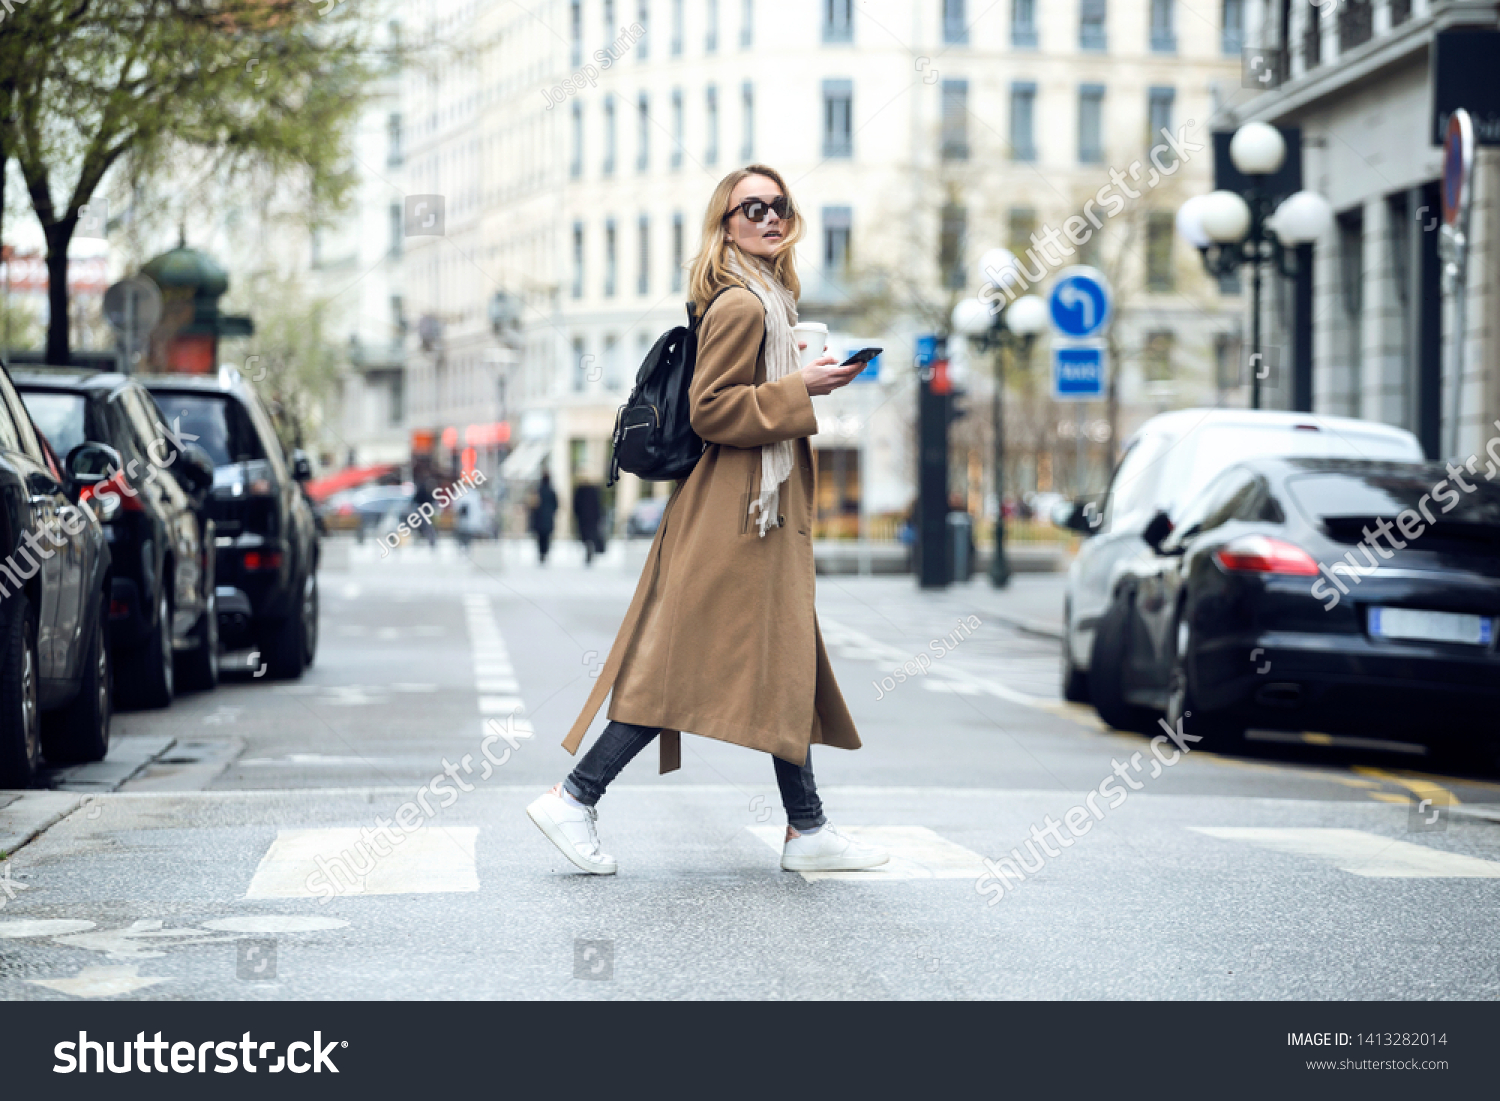 Shot of pretty young woman crossing the street while holding the smartphone and looking sideways. #1413282014